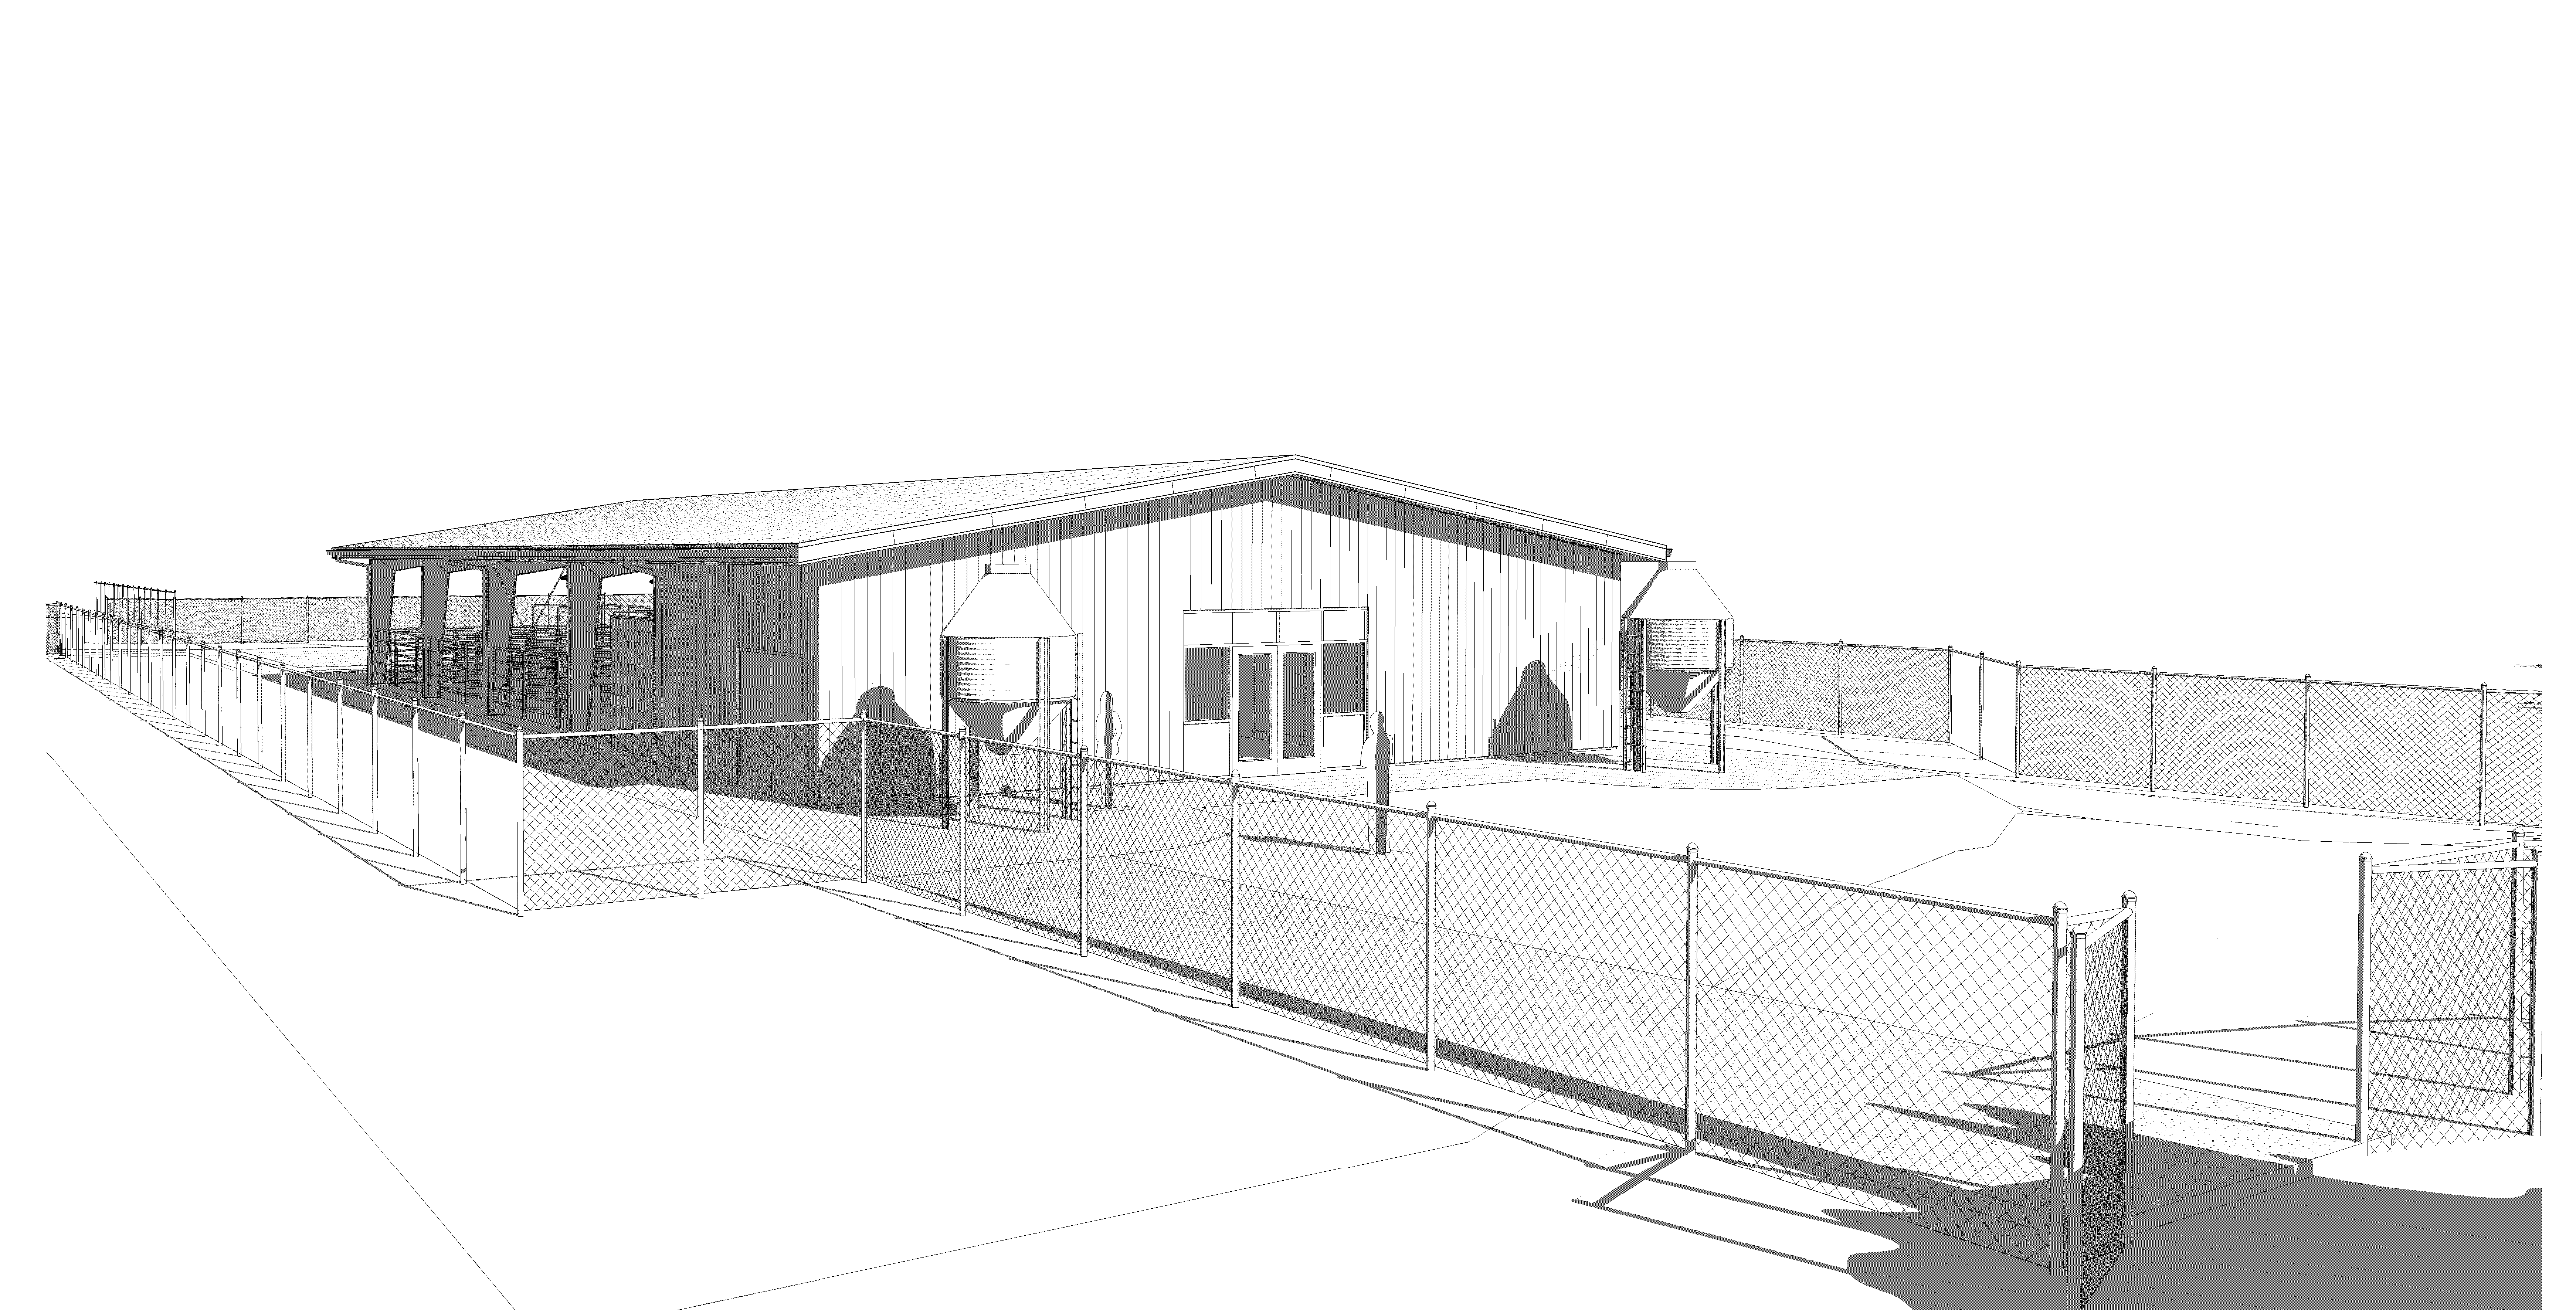 Foothill High School Agricultural Building & Site Improvements